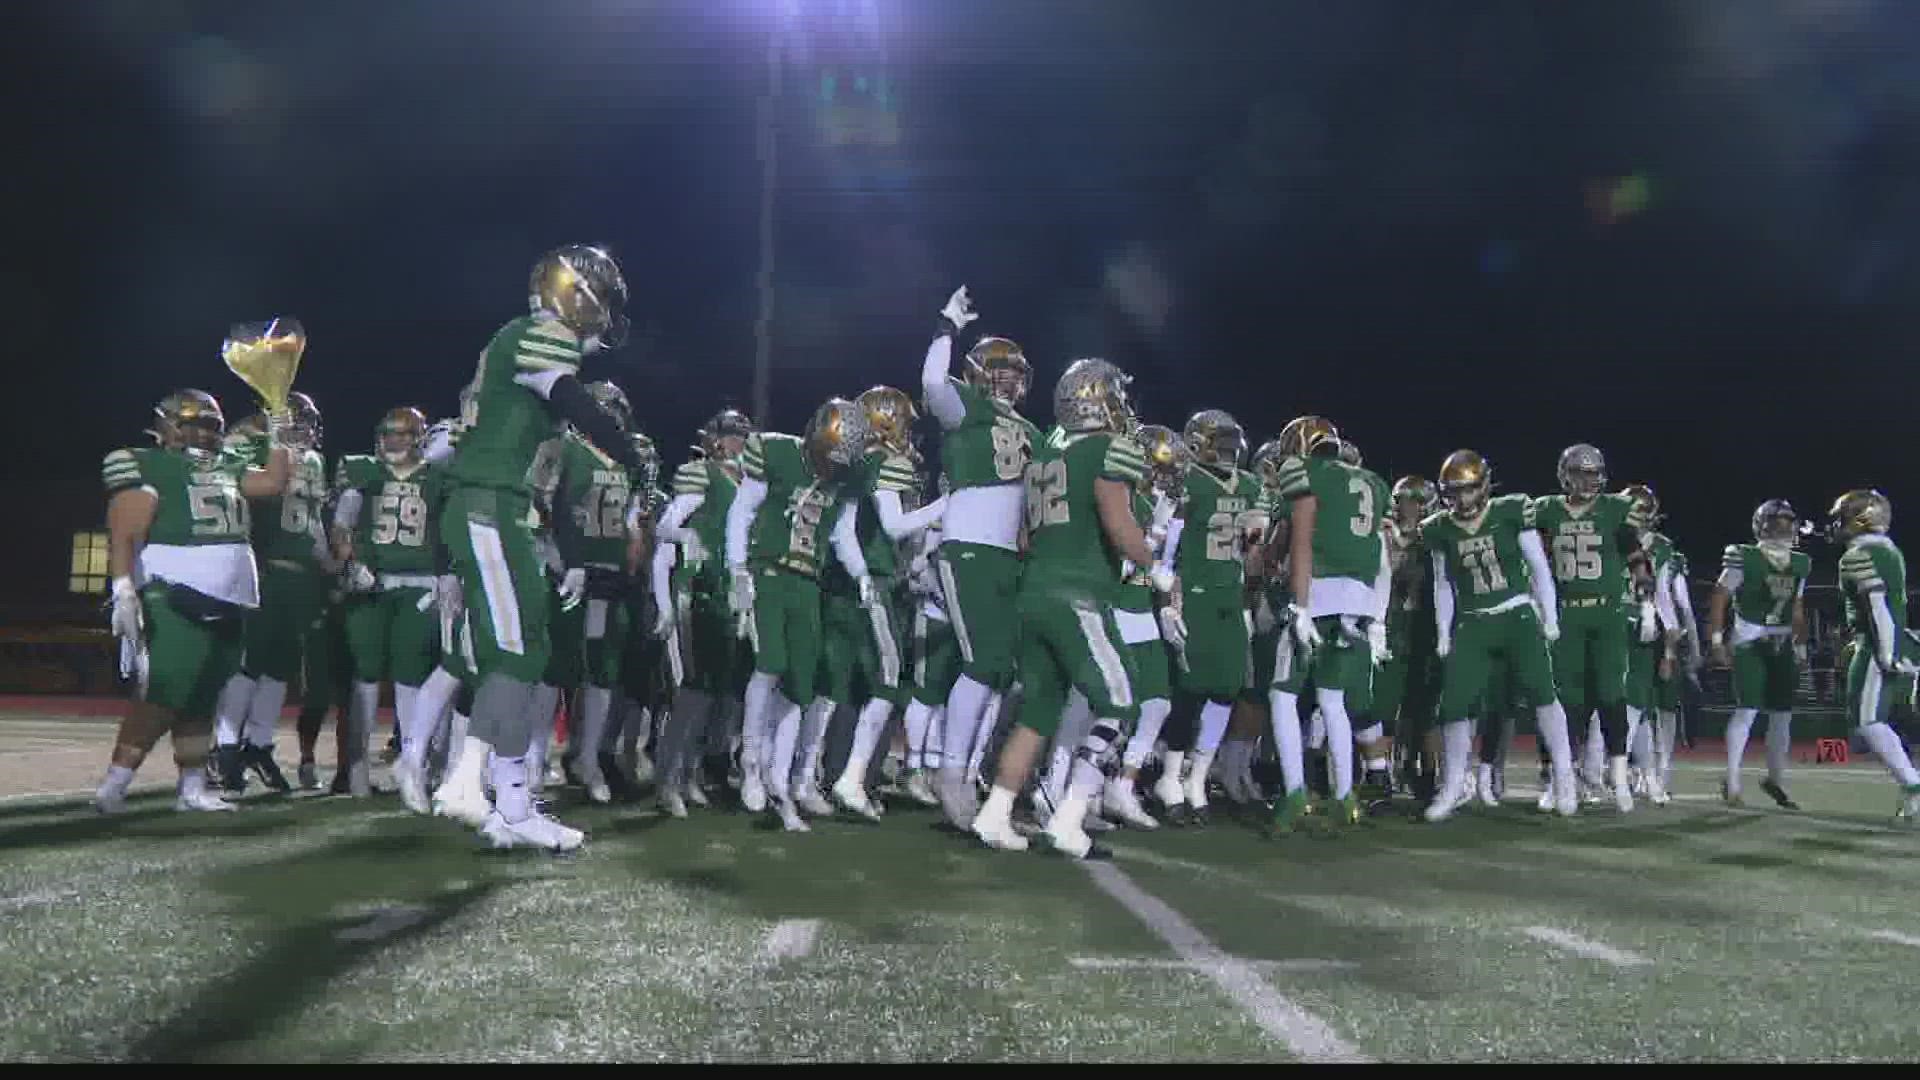 The Shamrocks will take on Center Grove in the 6A state final.